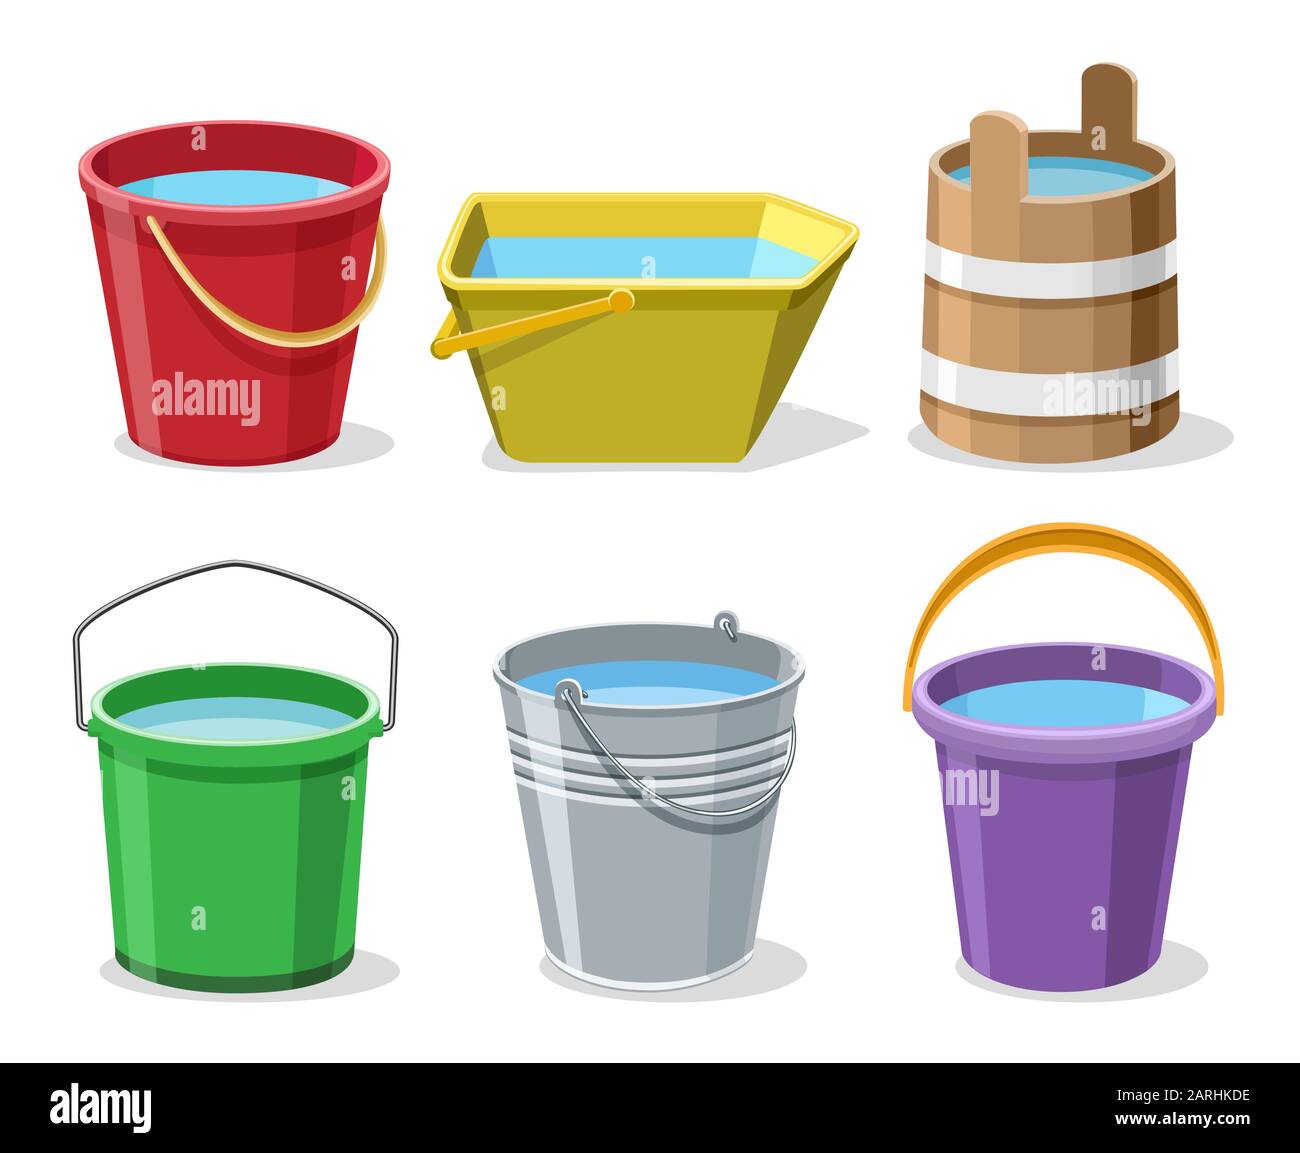 Illustration fill the water in the bucket until it's full vector